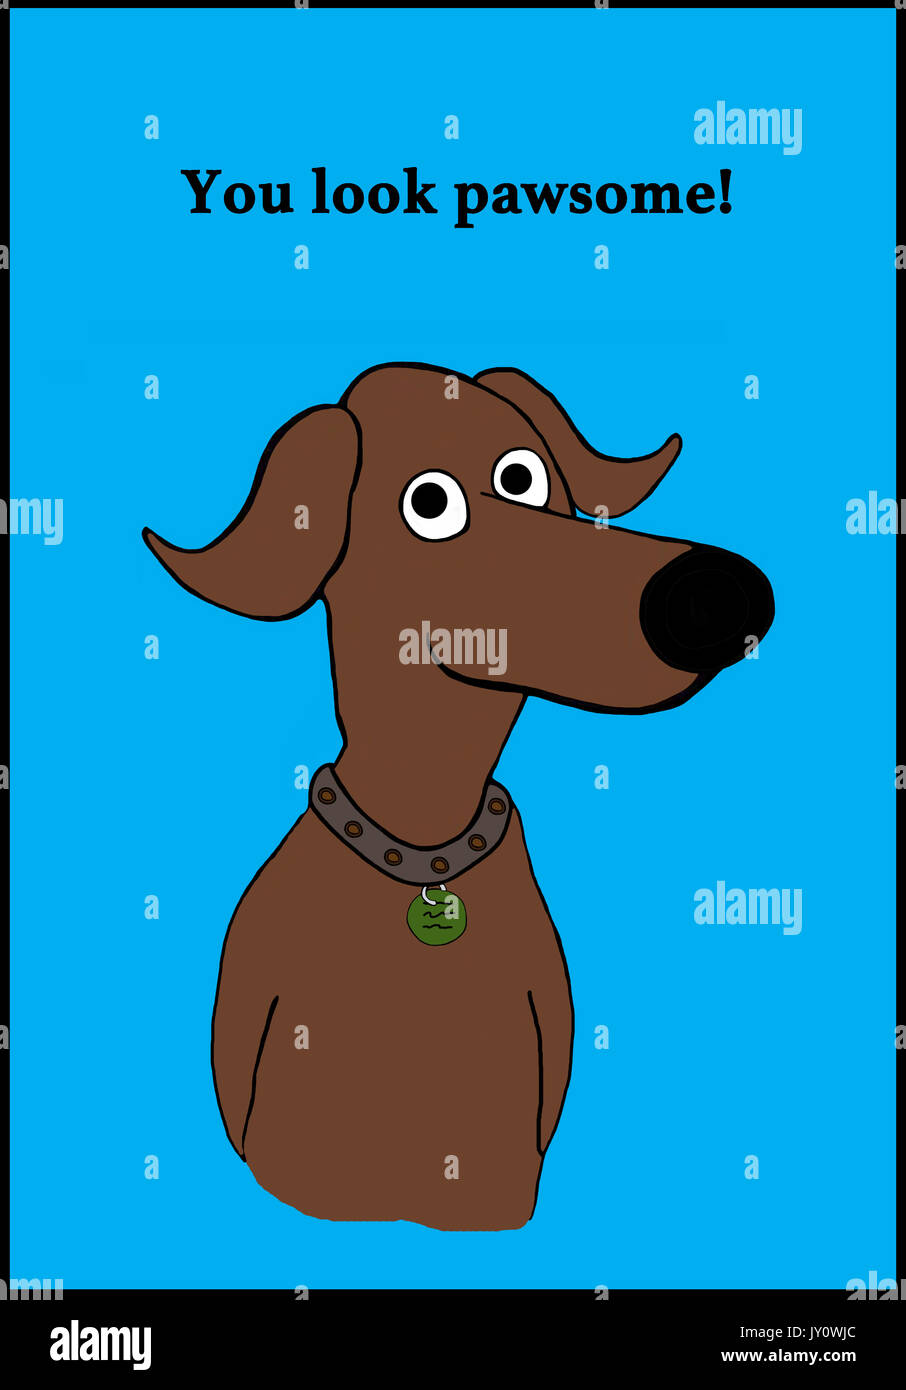 Cartoon illustration of a dog and a pun about awesome. Stock Photo